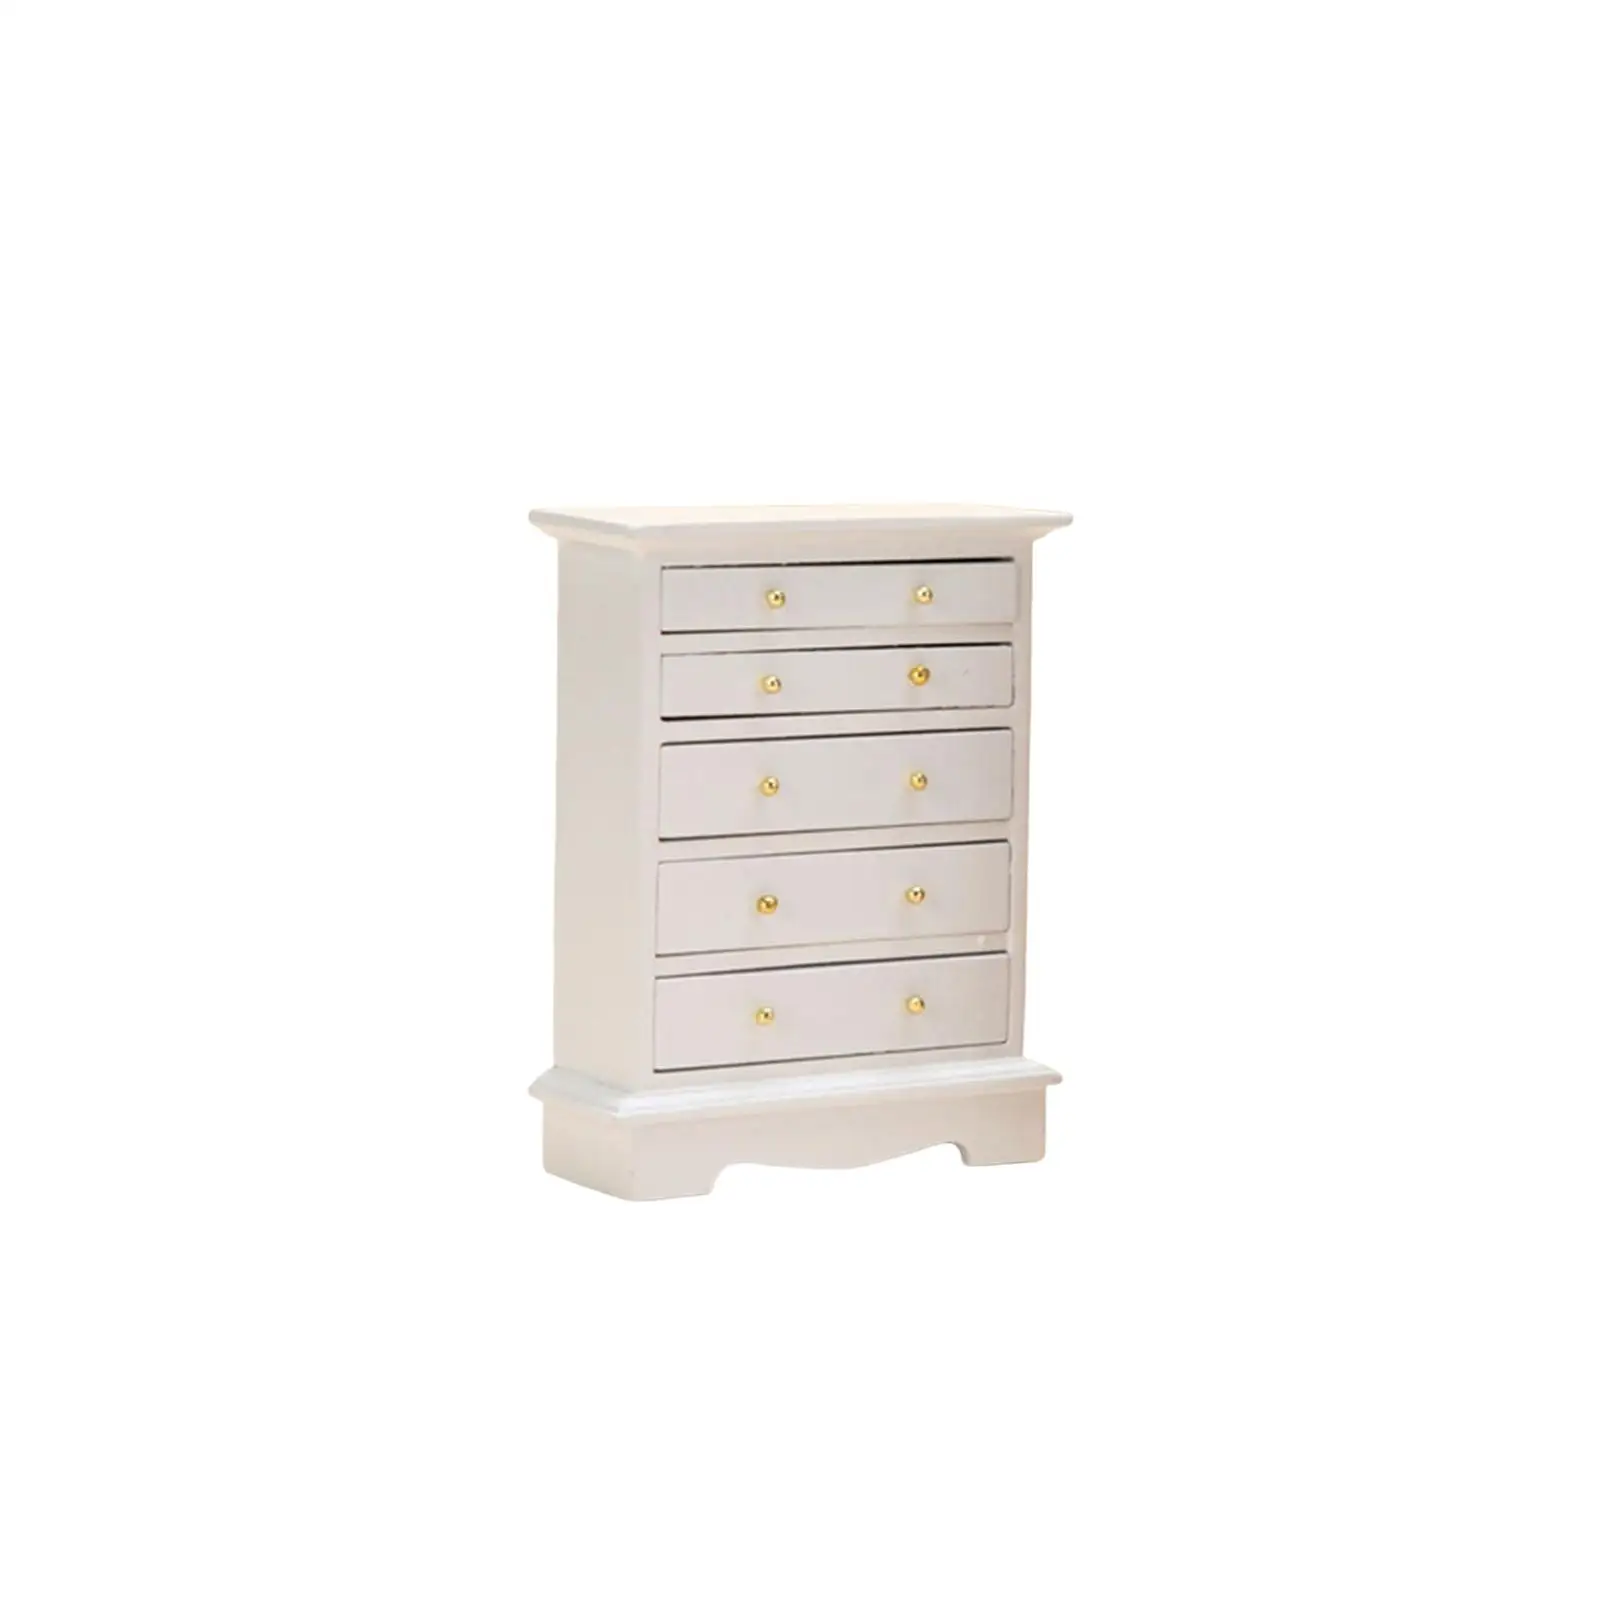 1:12 Dollhouse 5 Drawers Cabinet Model Simulation Wood Furniture Model Delicate Doll House Accessories for Living Room